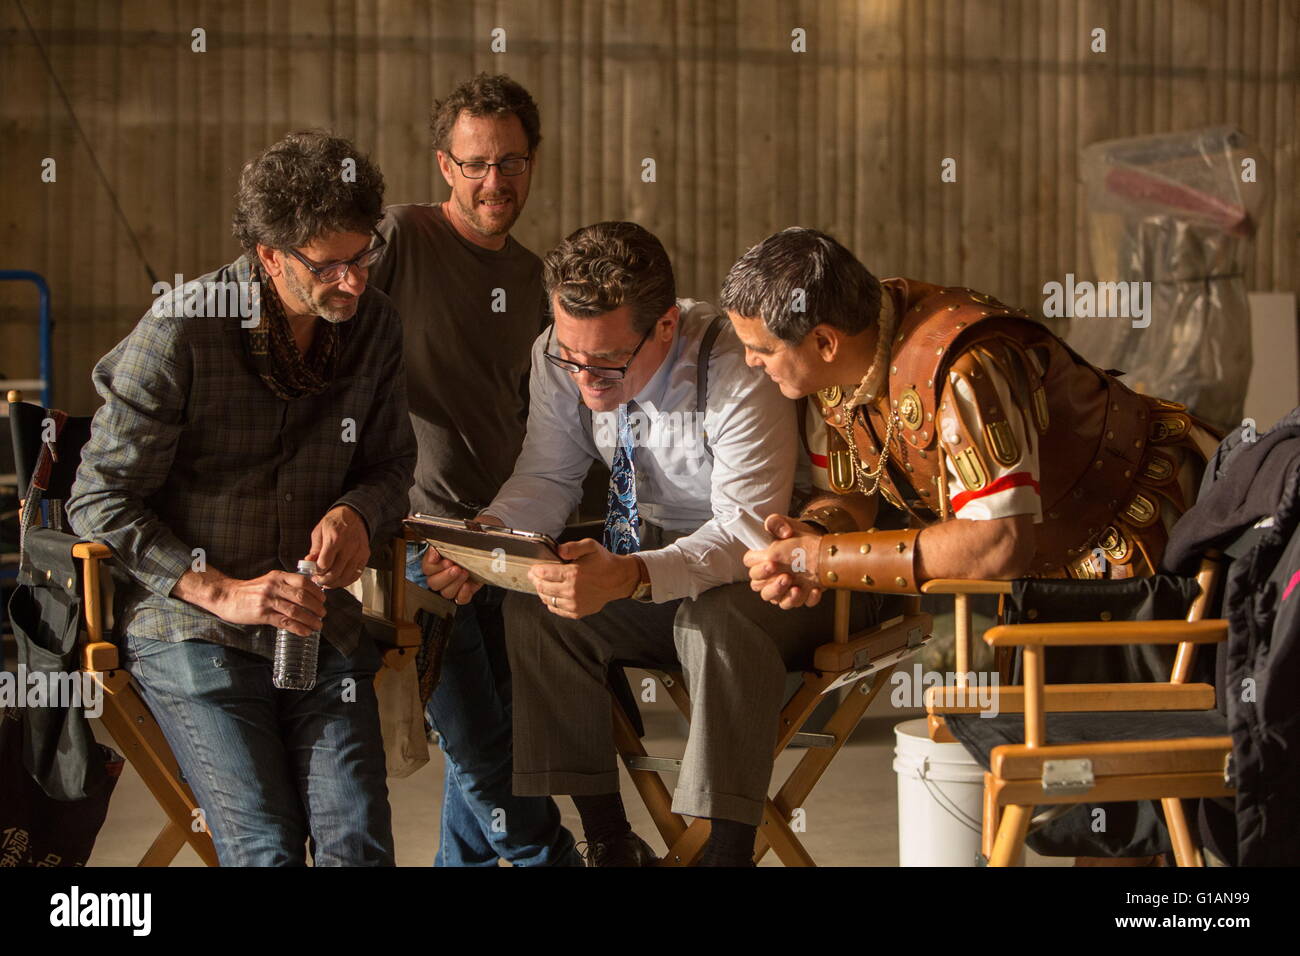 RELEASE DATE: February 5, 2016 TITLE: Hail, Caesar! STUDIO: Universal Pictures DIRECTOR: Ethan Coen, Joel Coen PLOT: A Hollywood fixer in the 1950s works to keep the studio's stars in line PICTURED: Josh Brolin, George Clooney, Ethan Coen, Joel Coen on set (Credit: c Universal Pictures/Entertainment Pictures/) Stock Photo